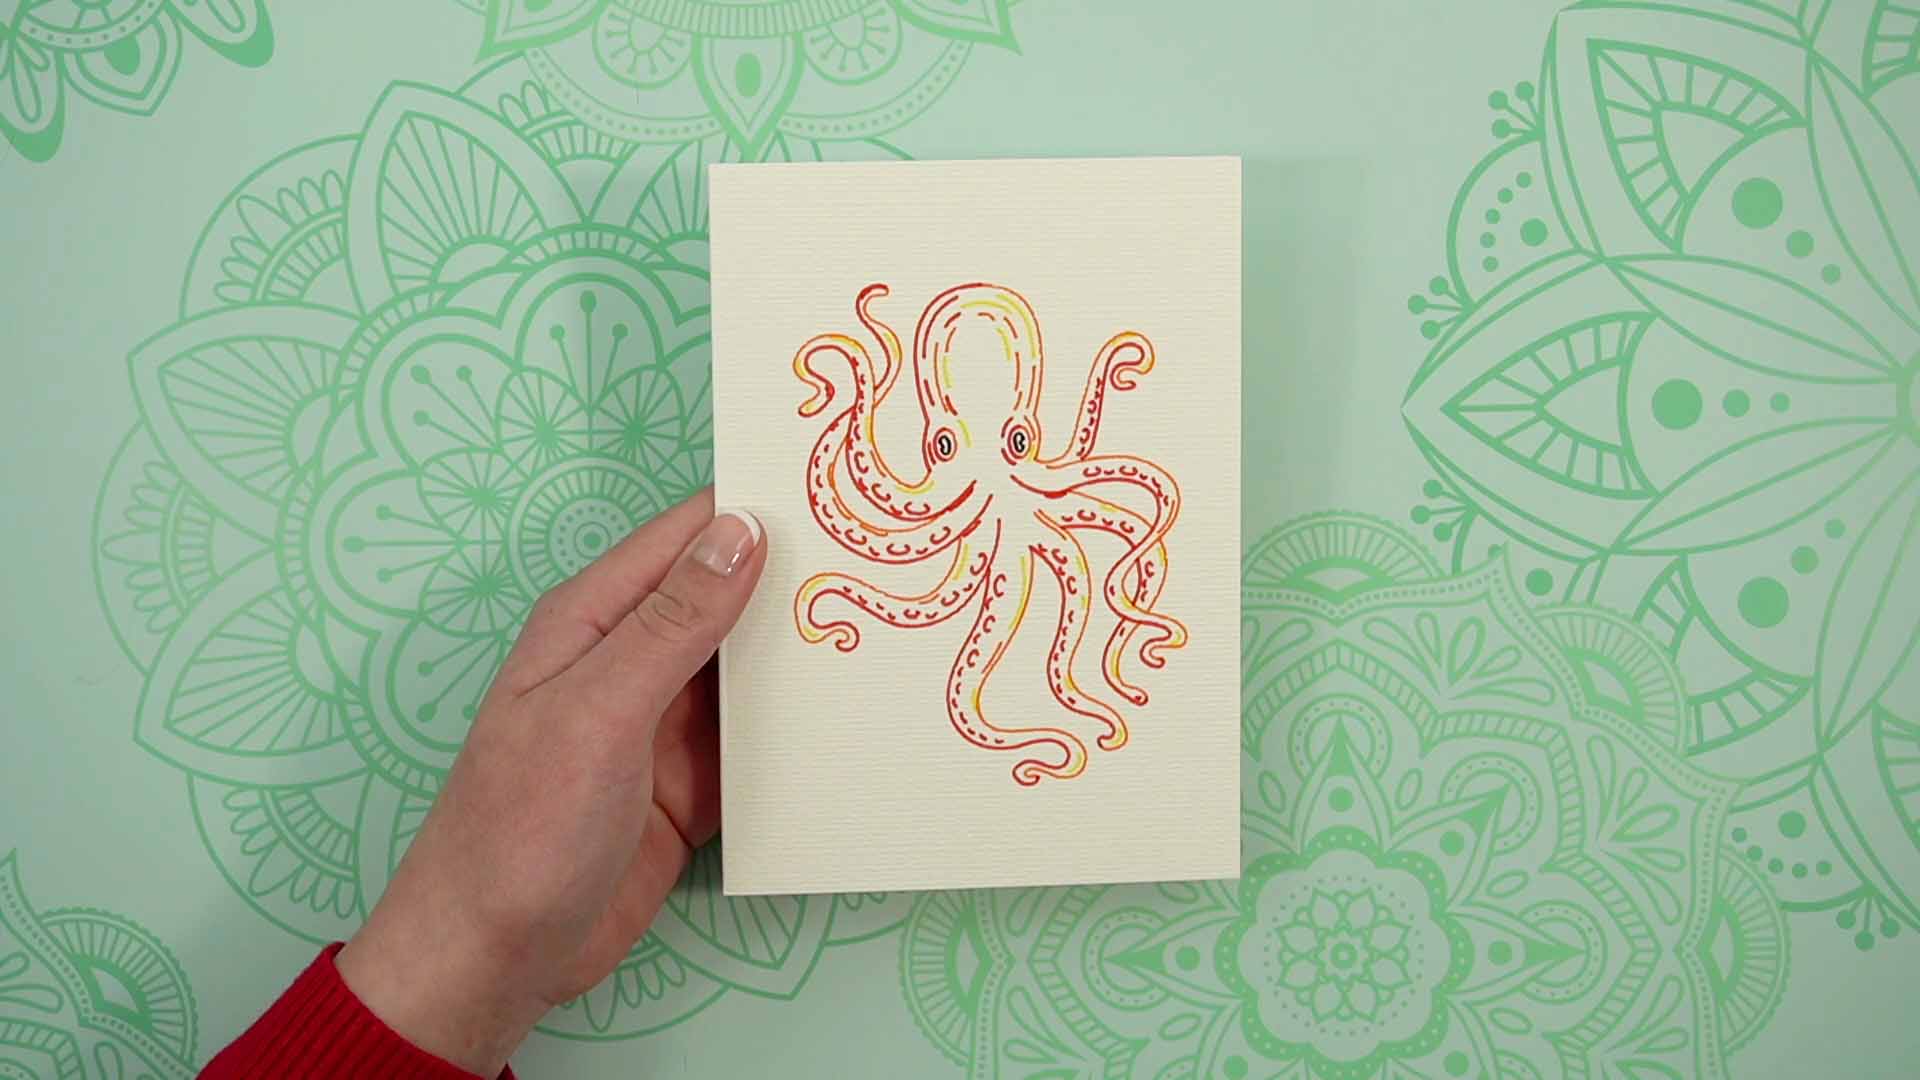 octopus design drawn with cricut watercolor markers